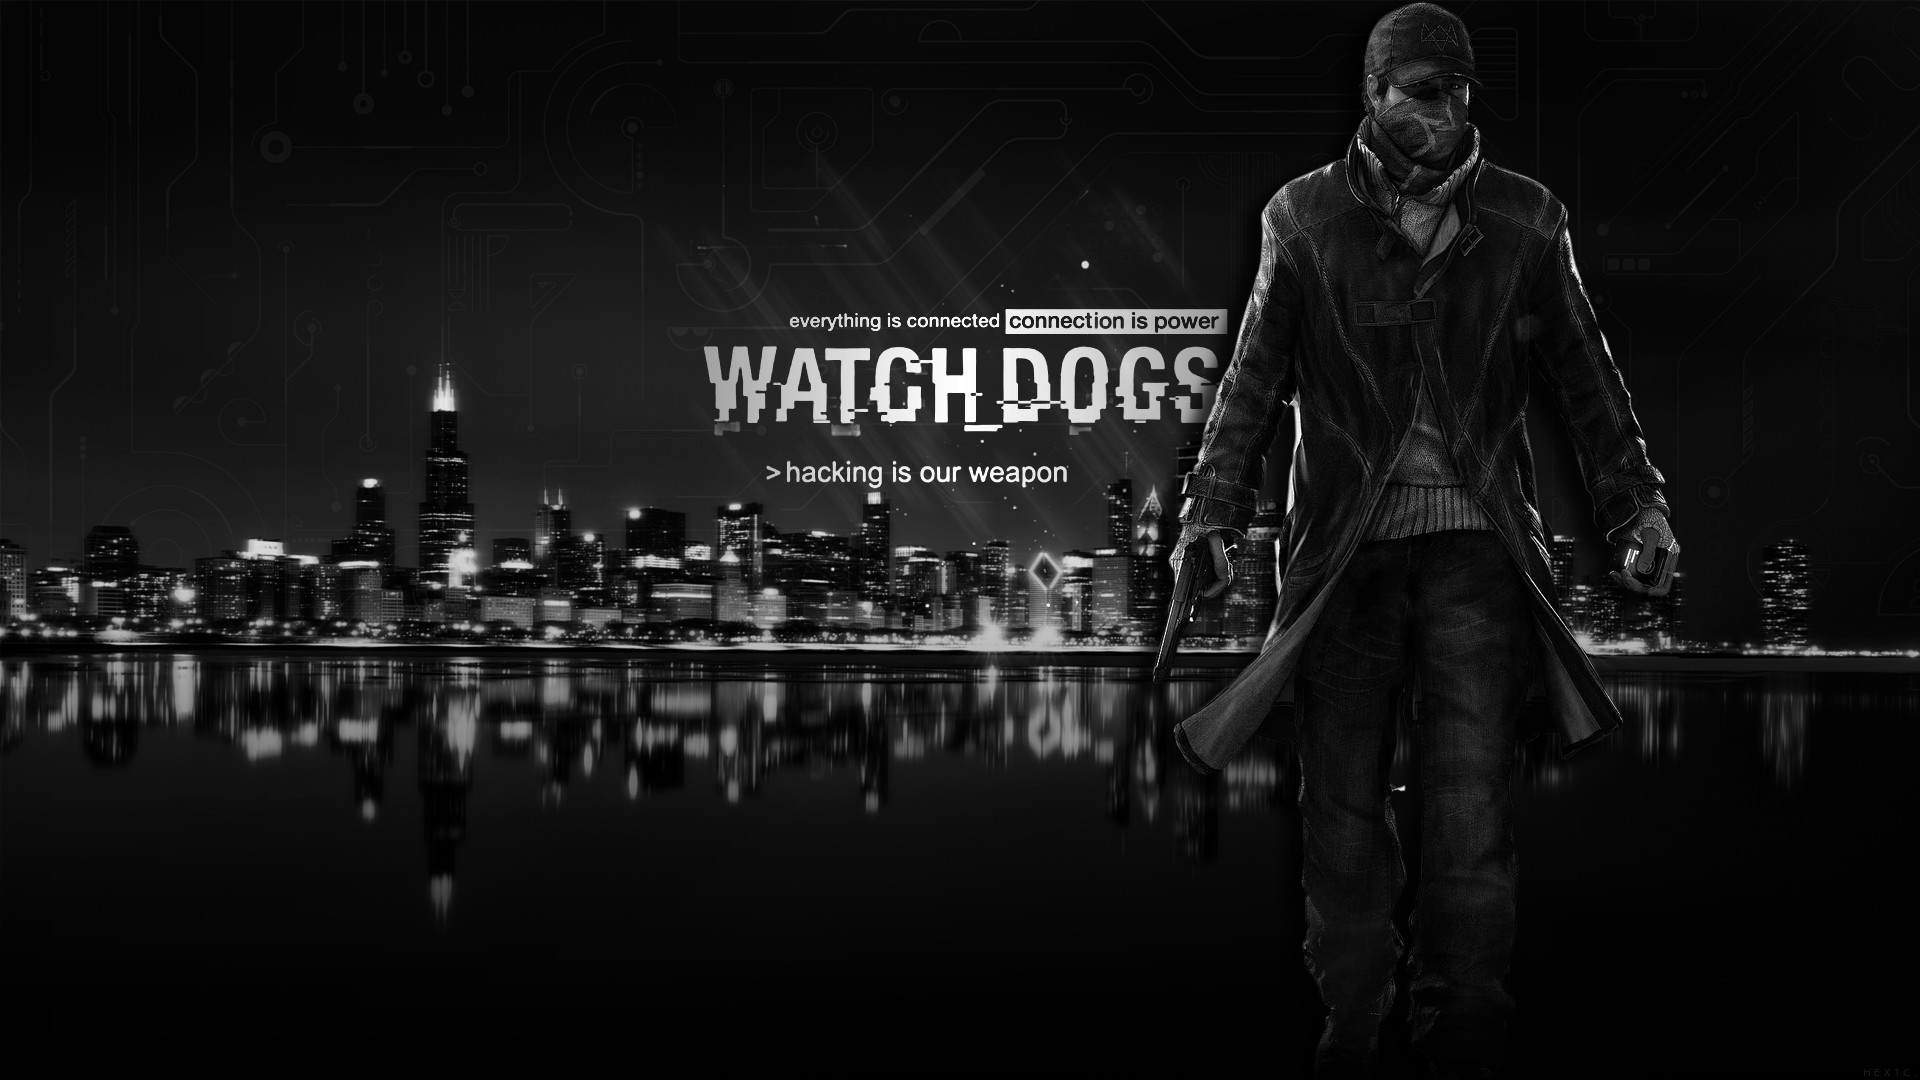 1920x1080 Watch Dogs Wallpaper HD by solidcell on DeviantArt.